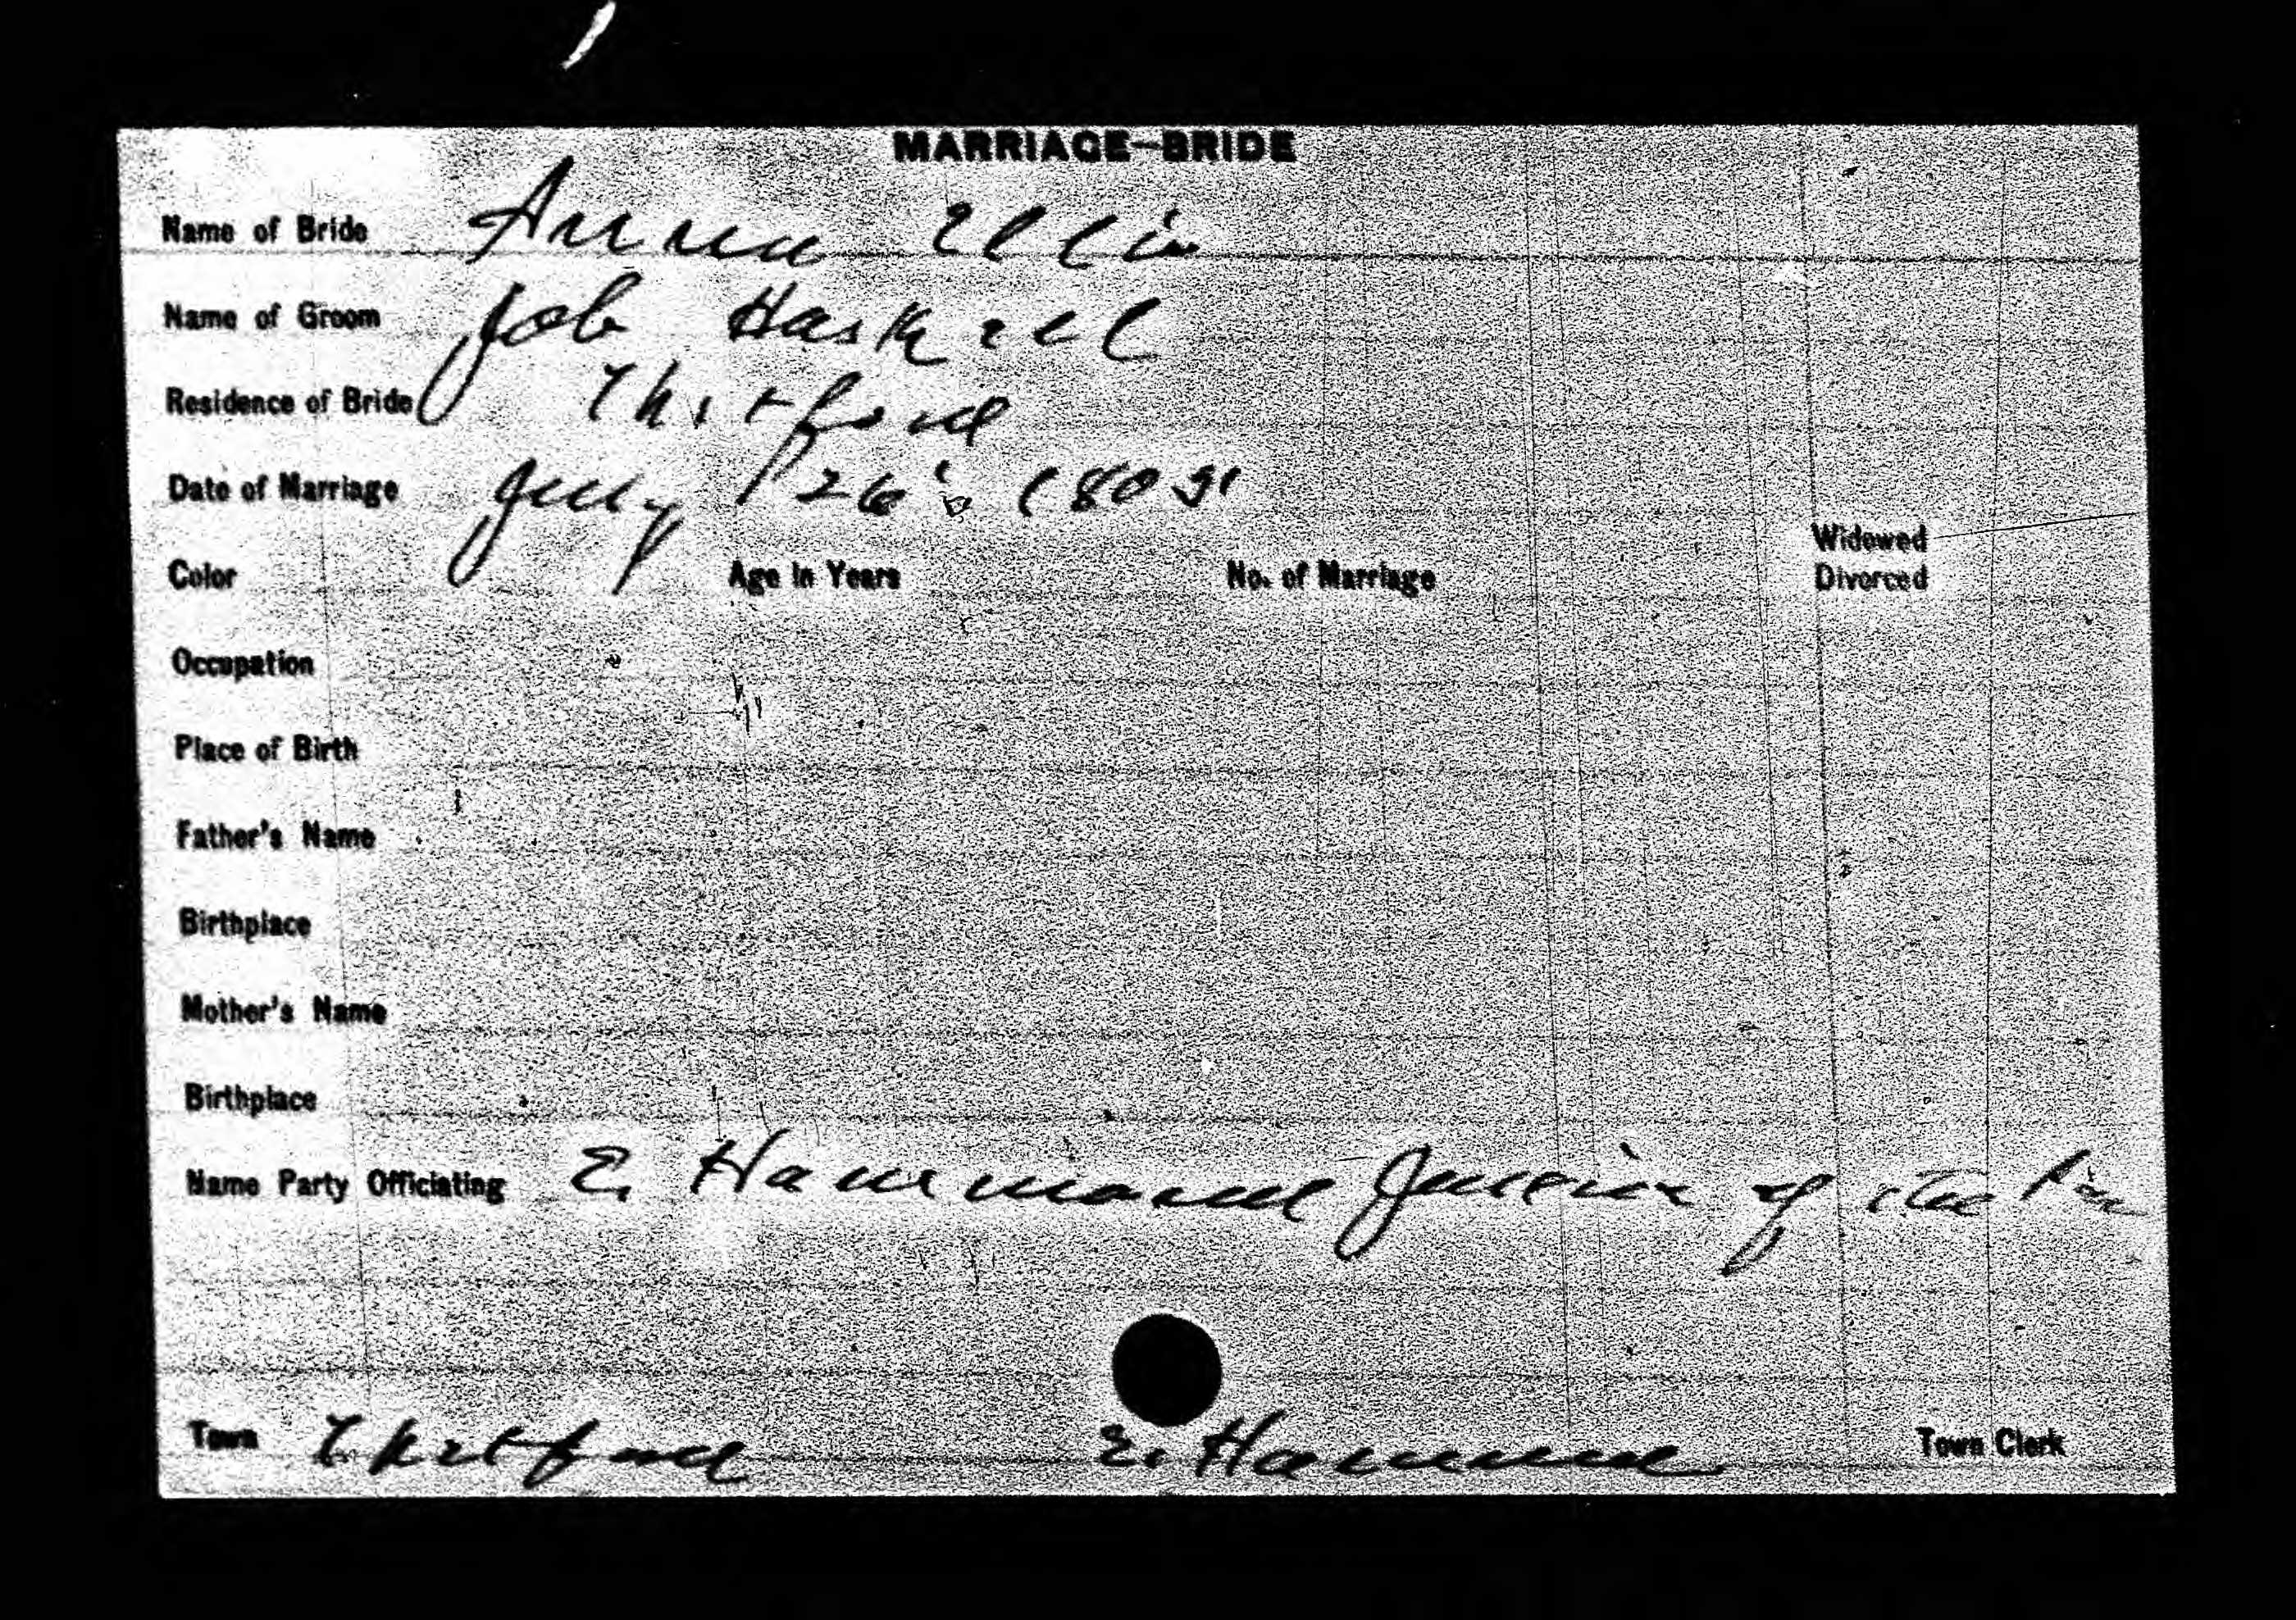 Indexed marriage record of Job Haskell and Anna Ellis